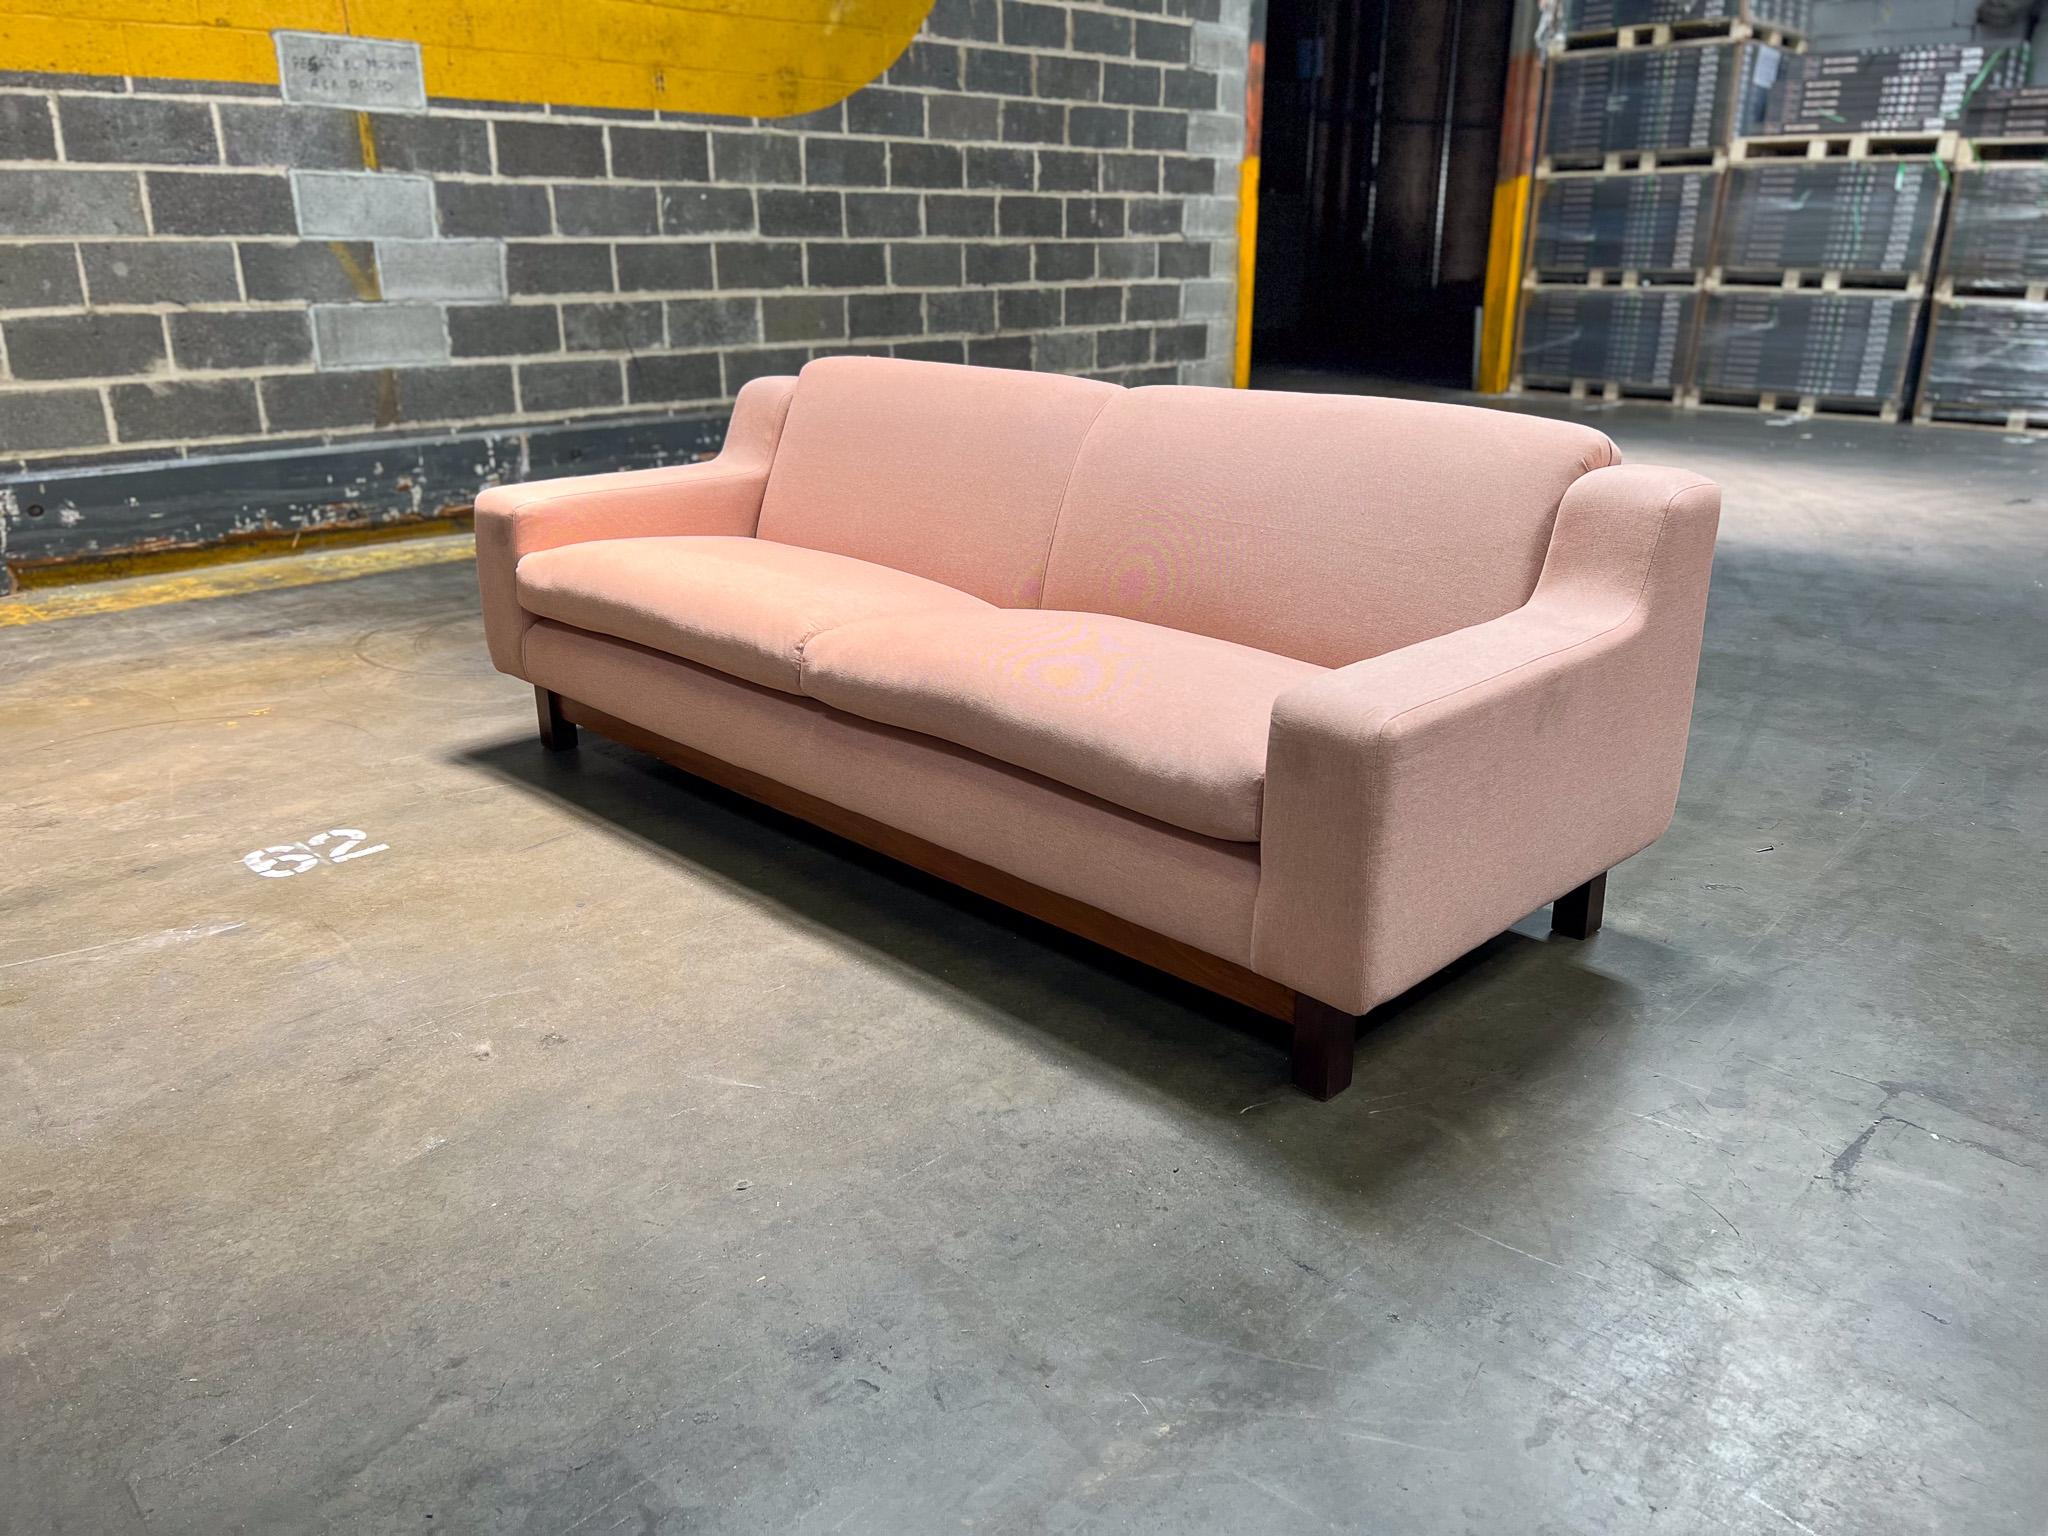 Available today, this Mid-Century Modern three seat sofa is made of a solid hardwood frame with linen upholstery in salmon. The base is made of Brazilian Rosewood, known as Jacaranda and showcases colorful veins.

This sofa has been re-upholstered